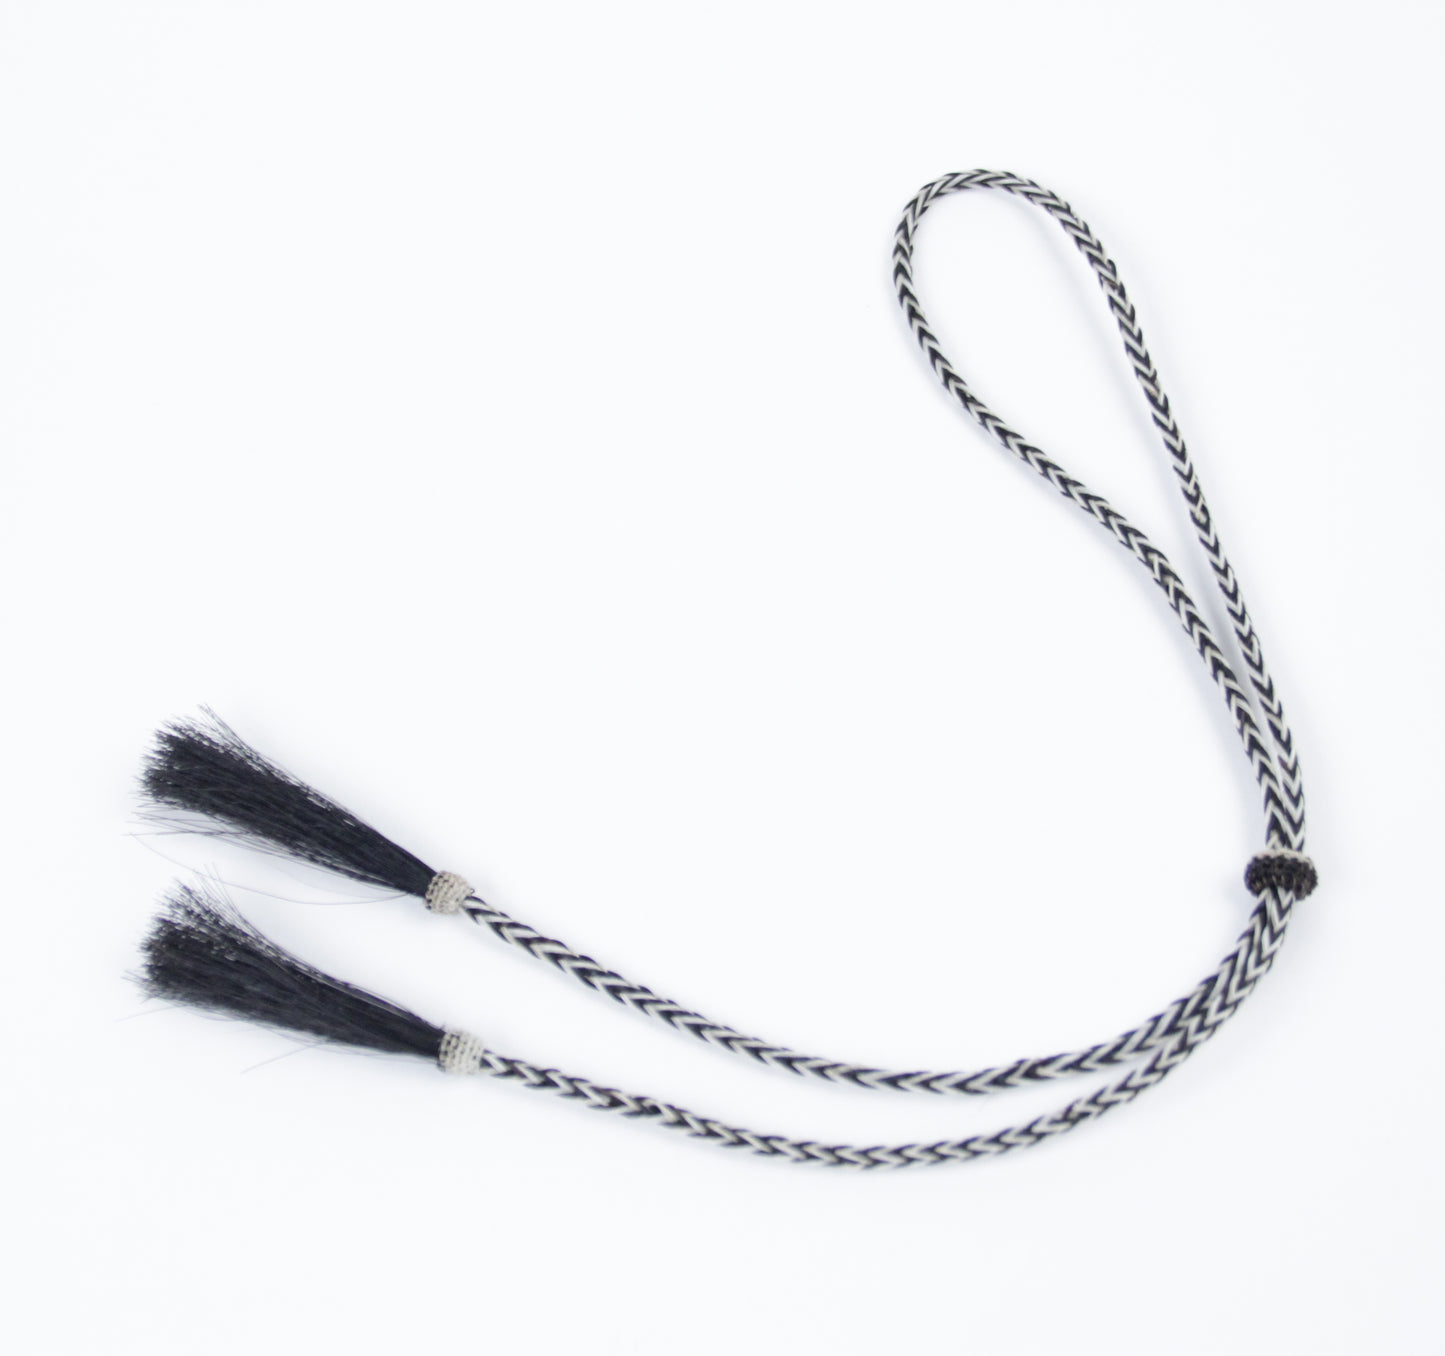 woven horsehair bolo tie black or brown